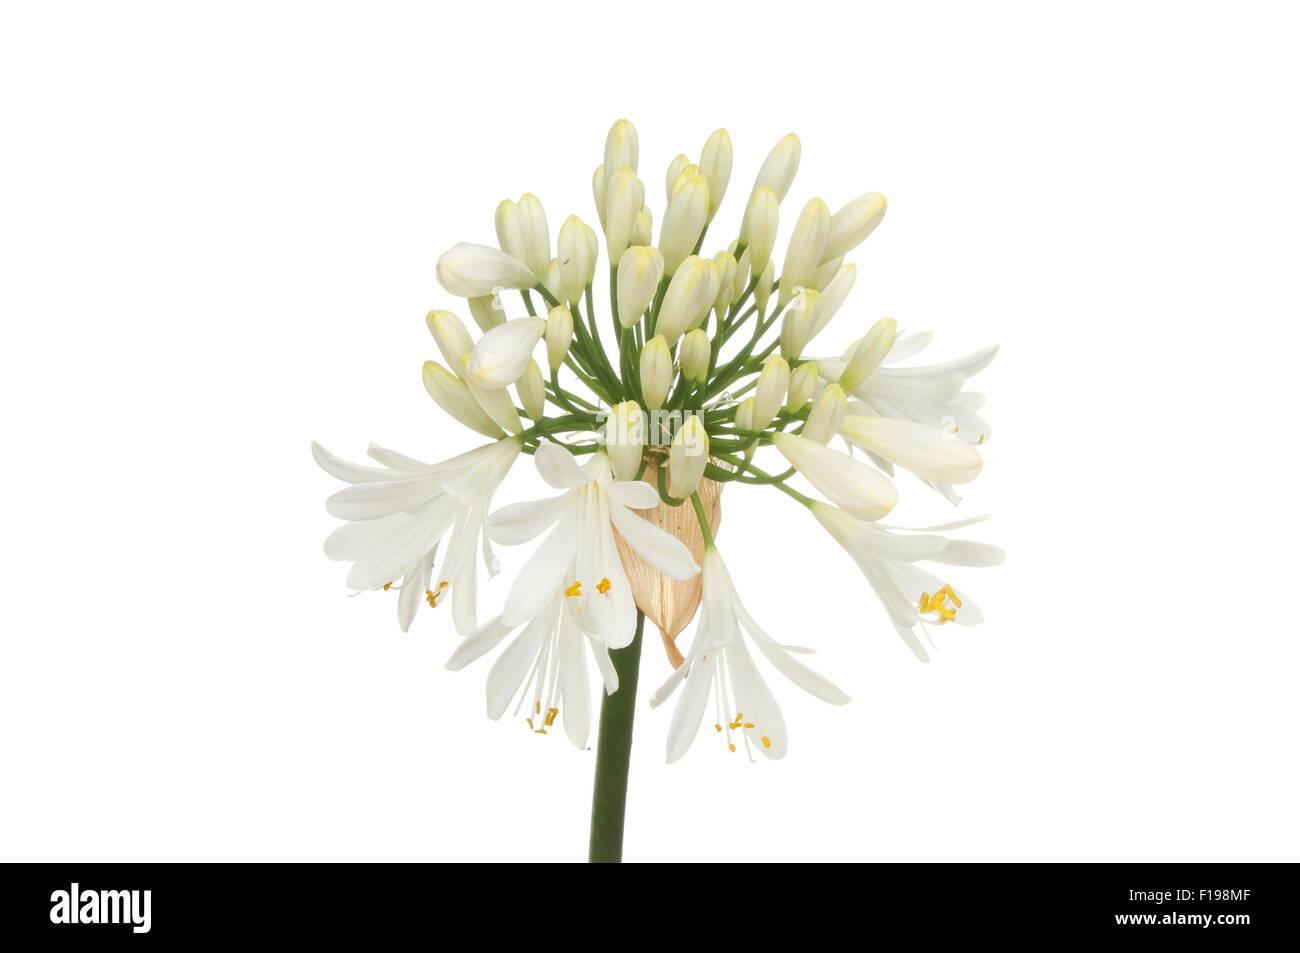 White Agapanthus flower also known as lily of the Nile or African lily isolated against white Stock Photo